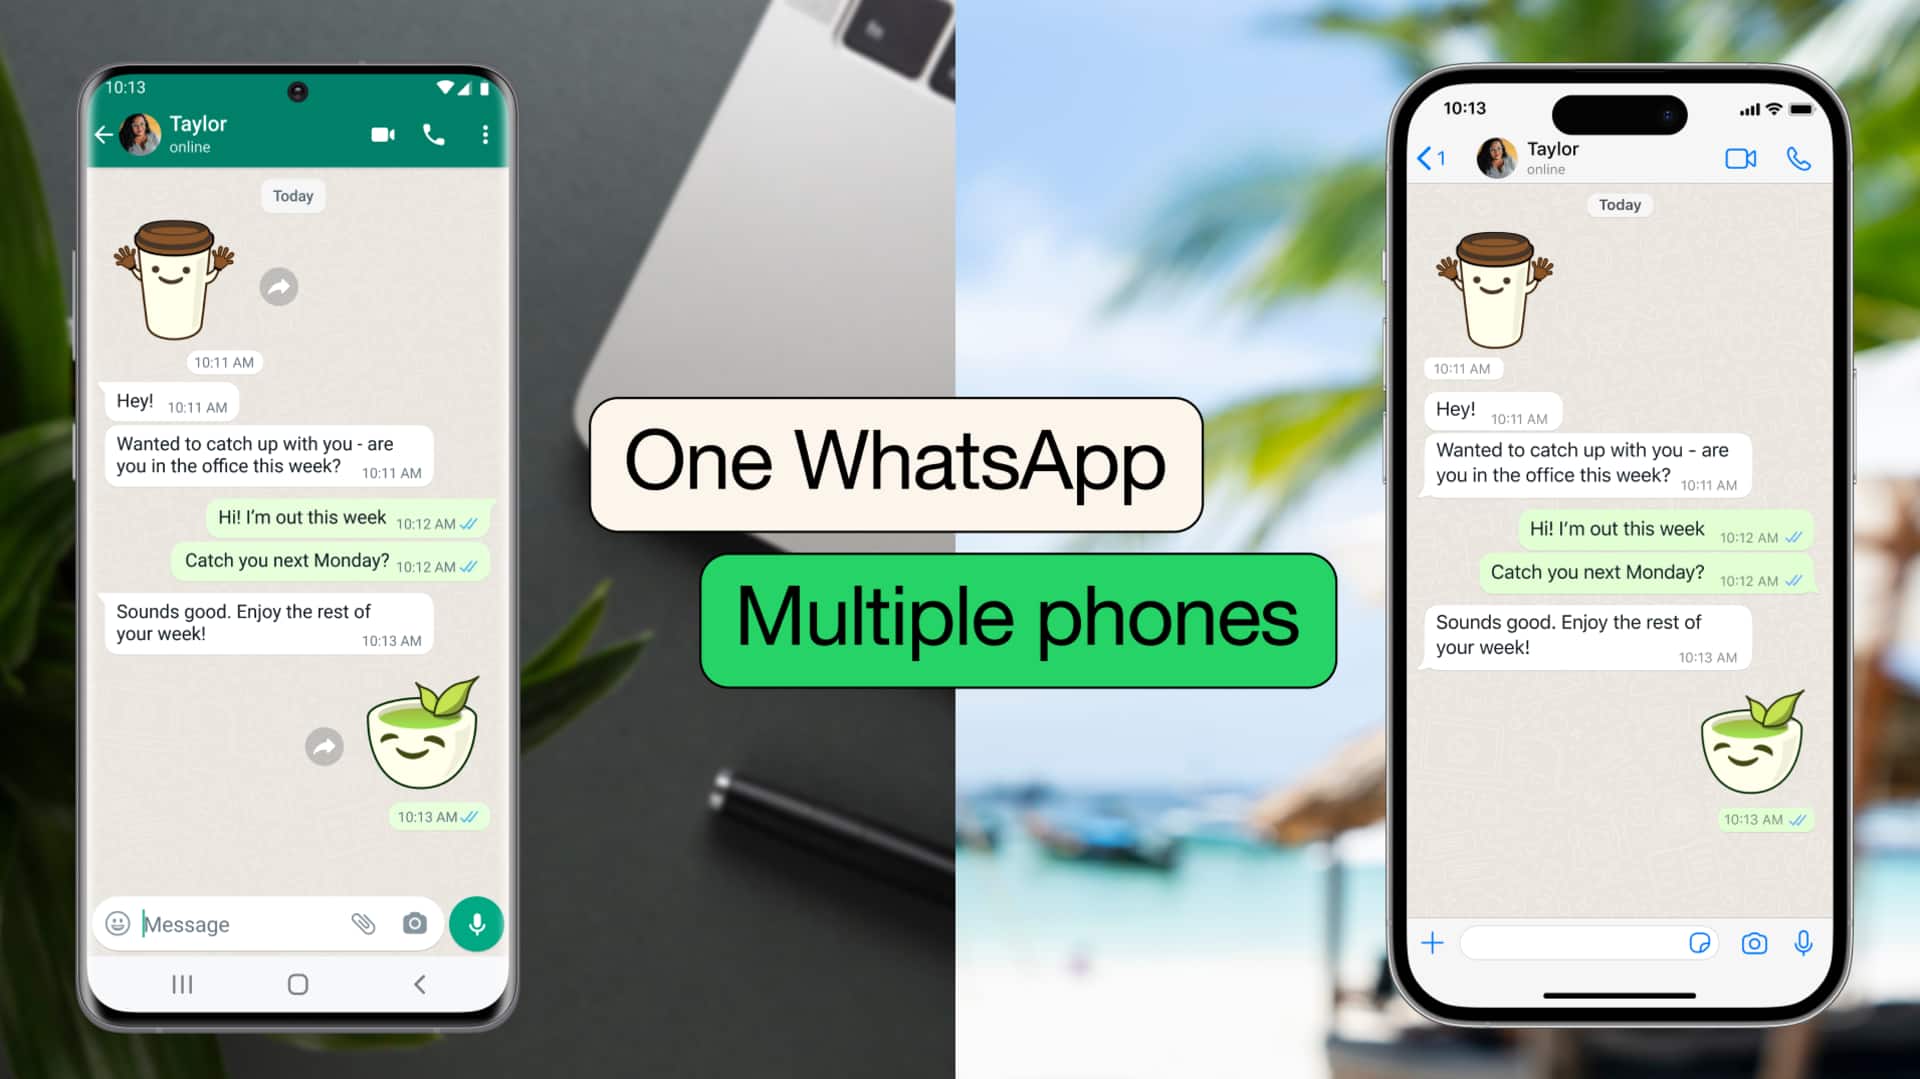 How to use your WhatsApp account on multiple phones